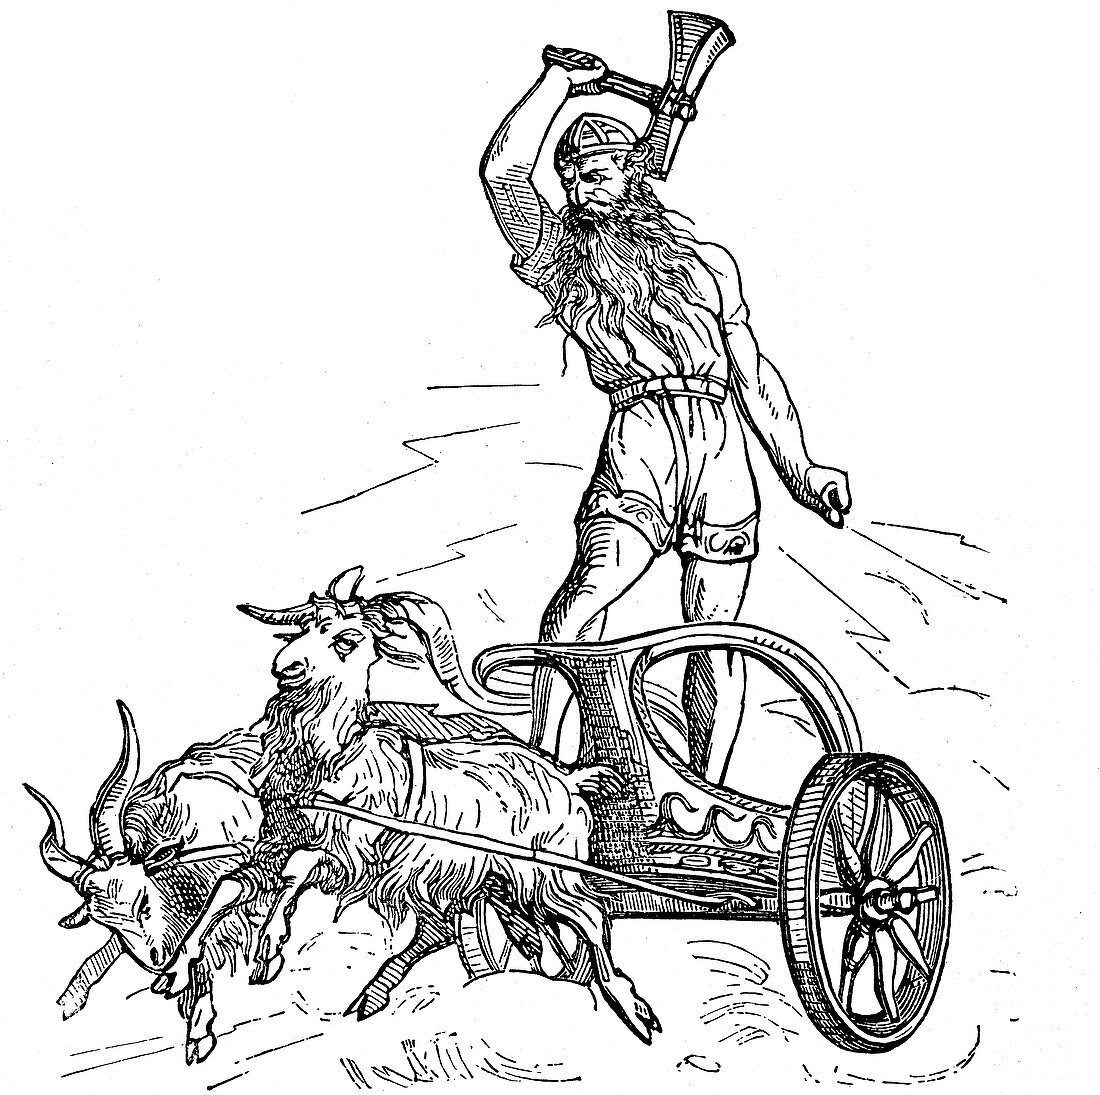 Thor riding in chariot drawn by goats